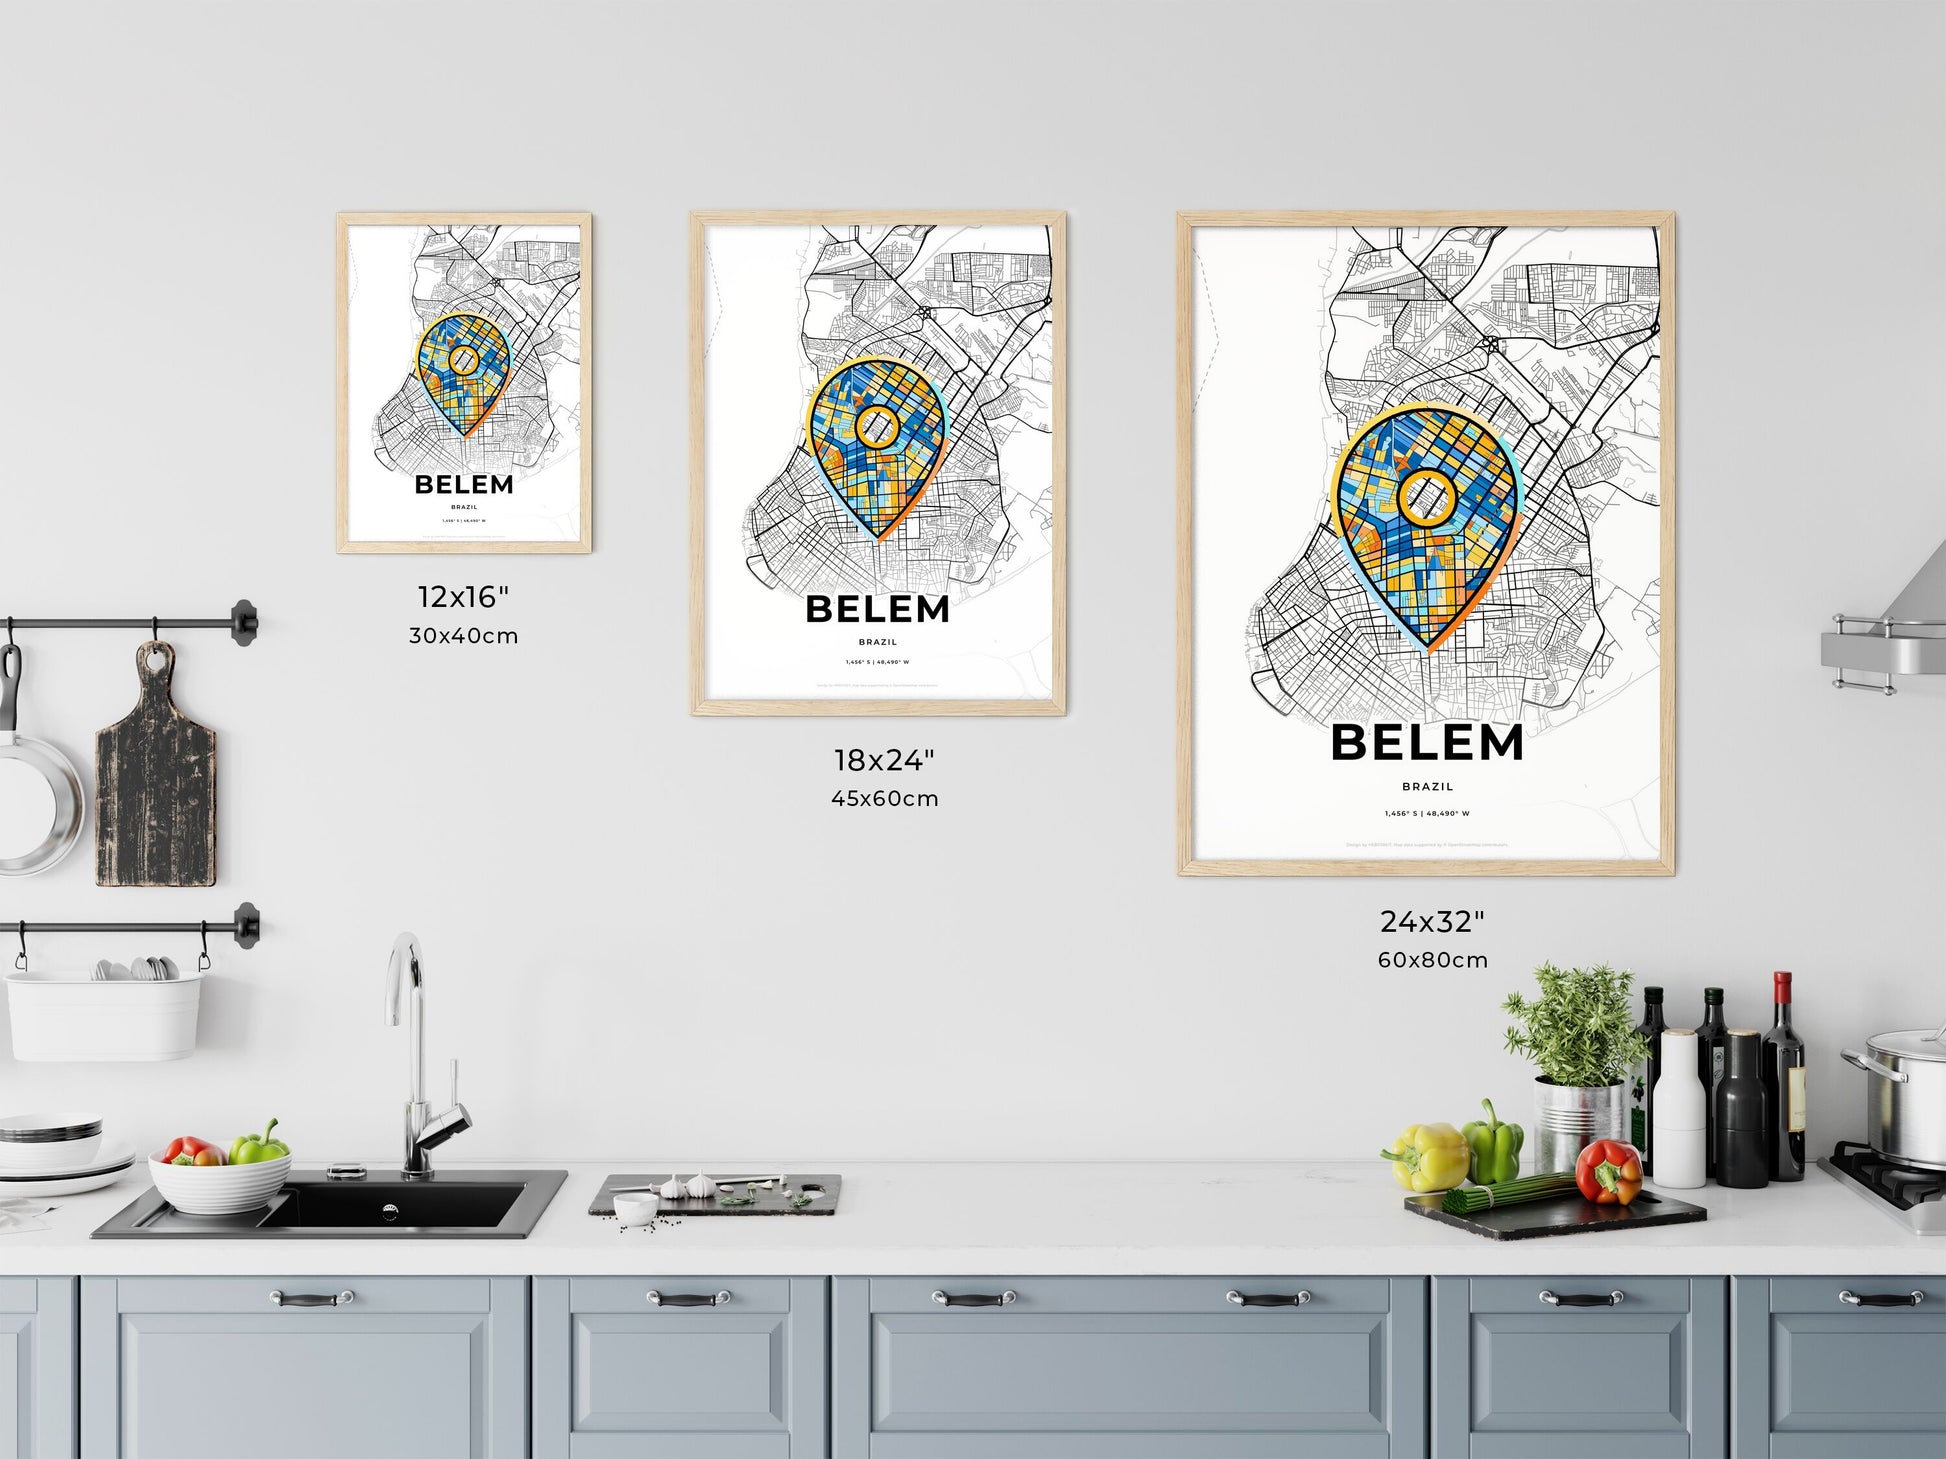 BELEM BRAZIL minimal art map with a colorful icon. Where it all began, Couple map gift.